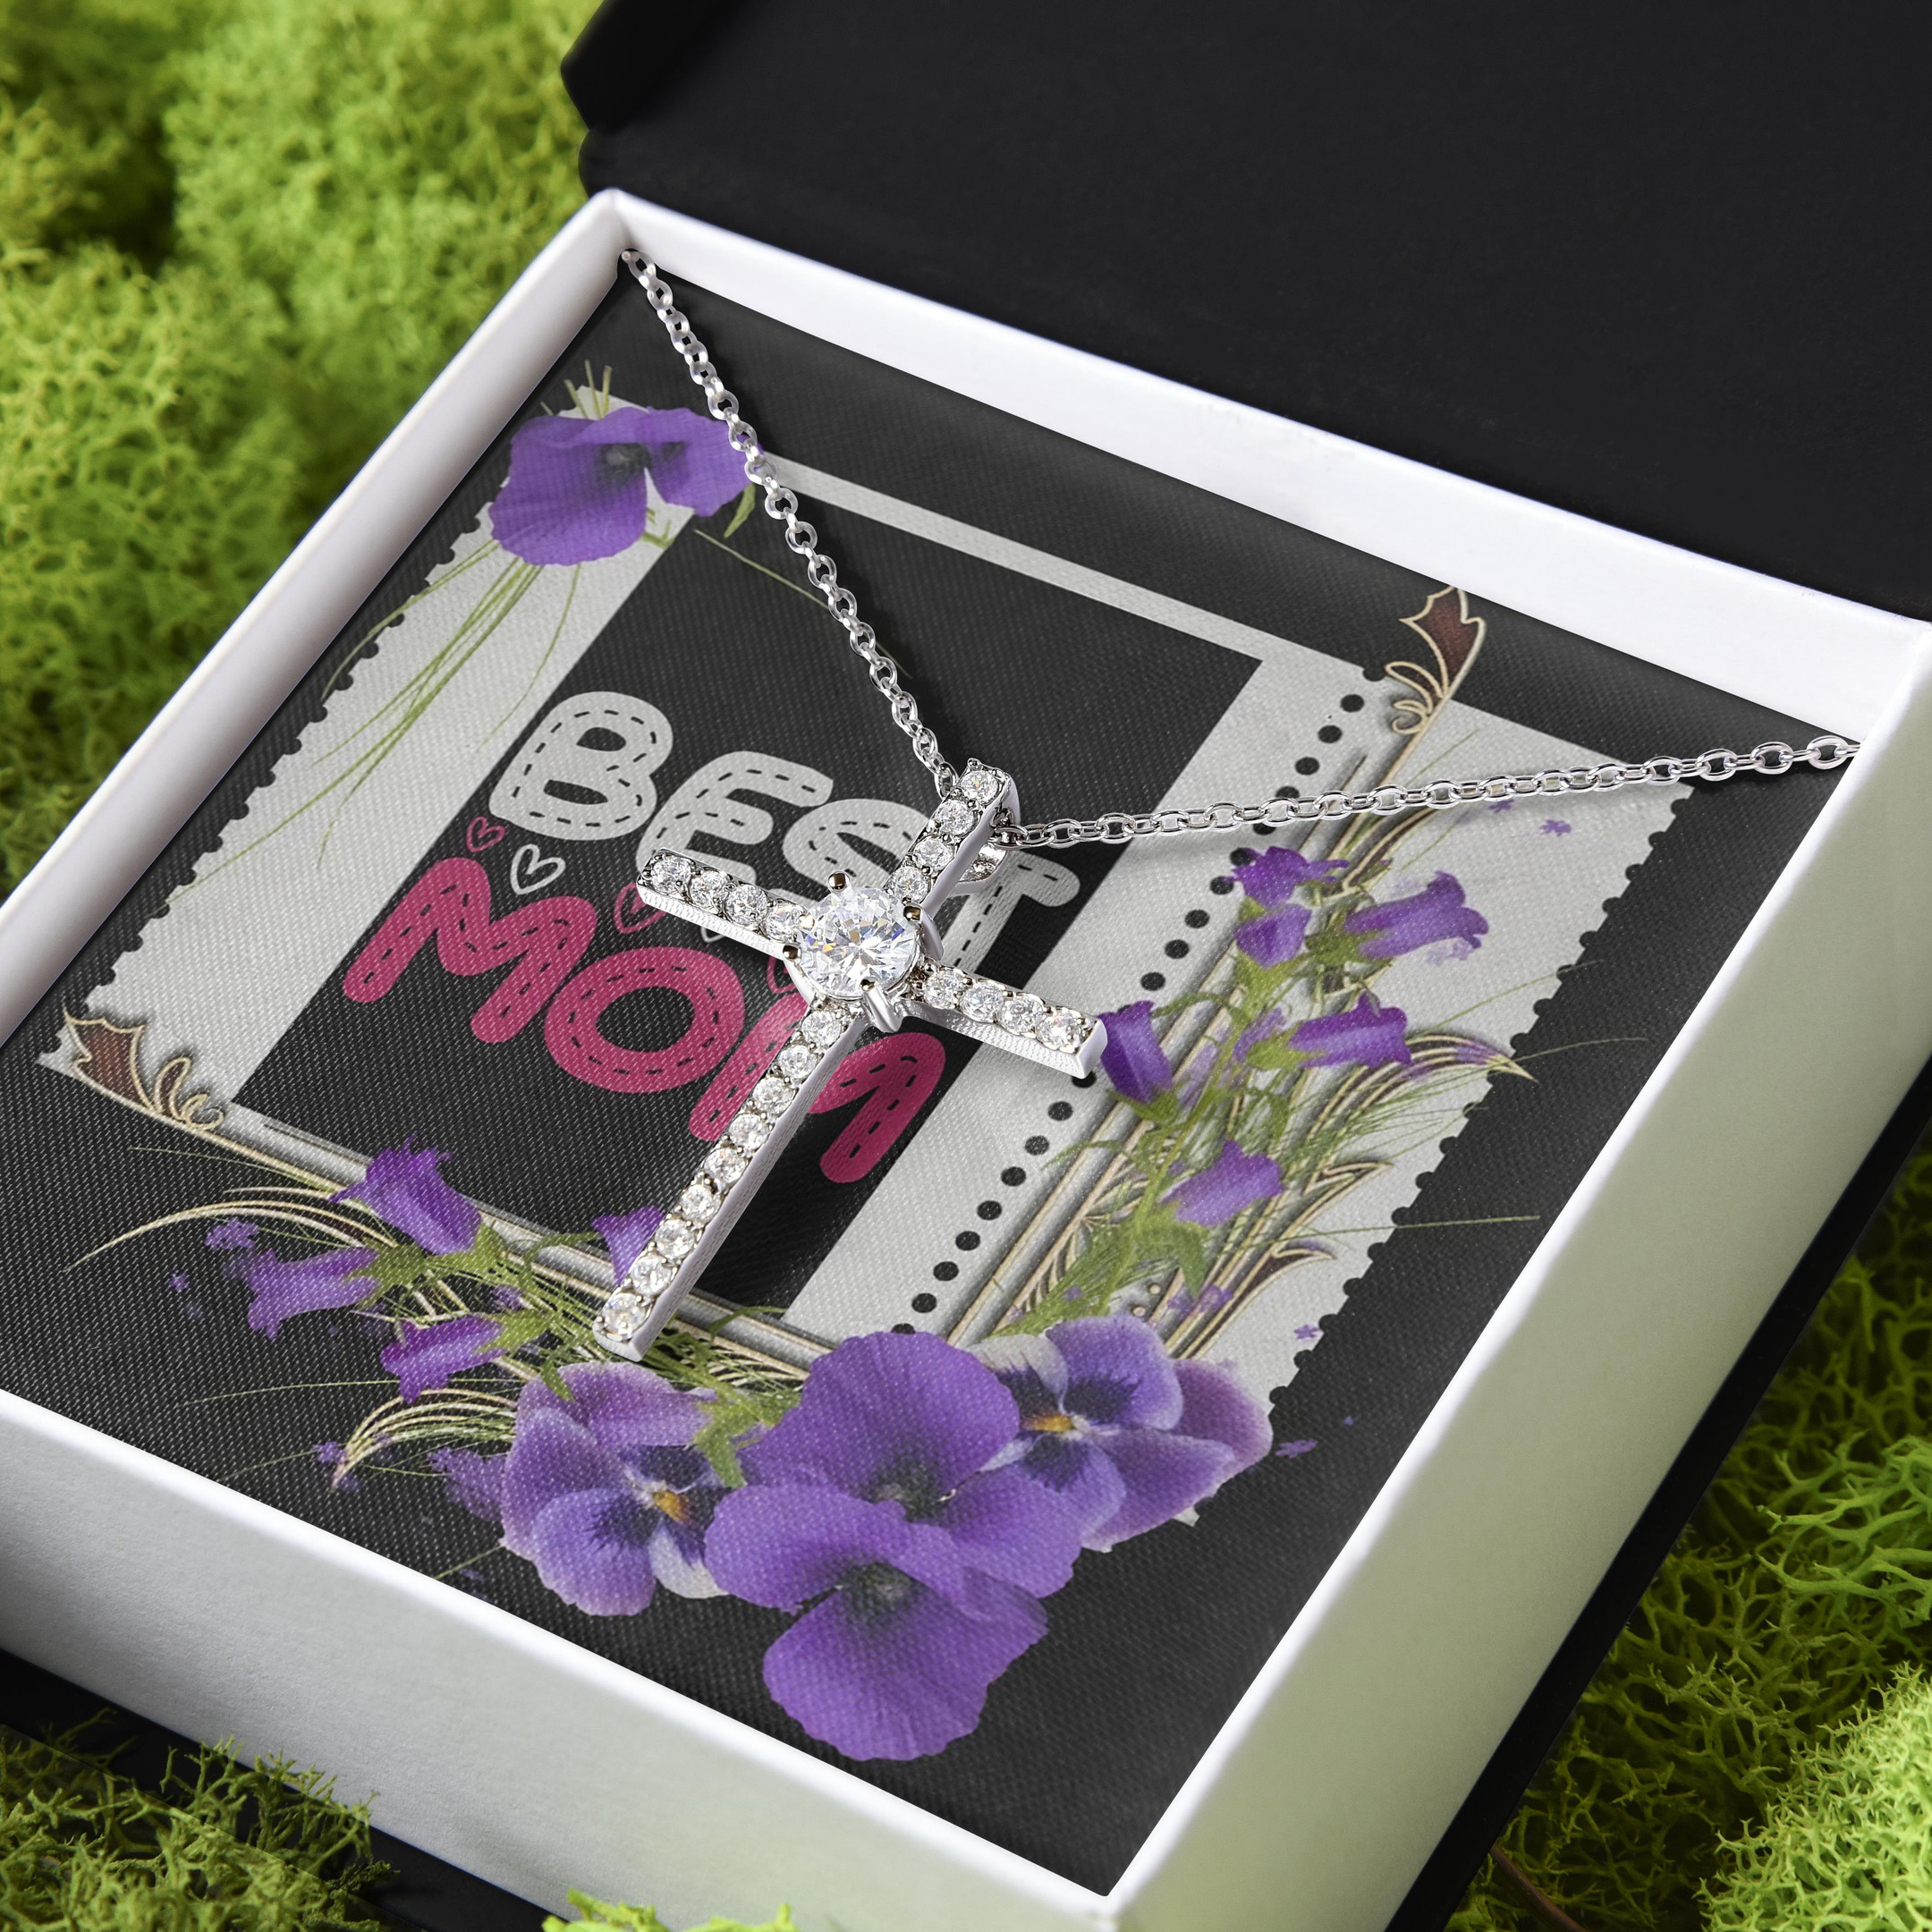 Best Mom Purple Flower Cutest Gift For Mom CZ Cross Necklace